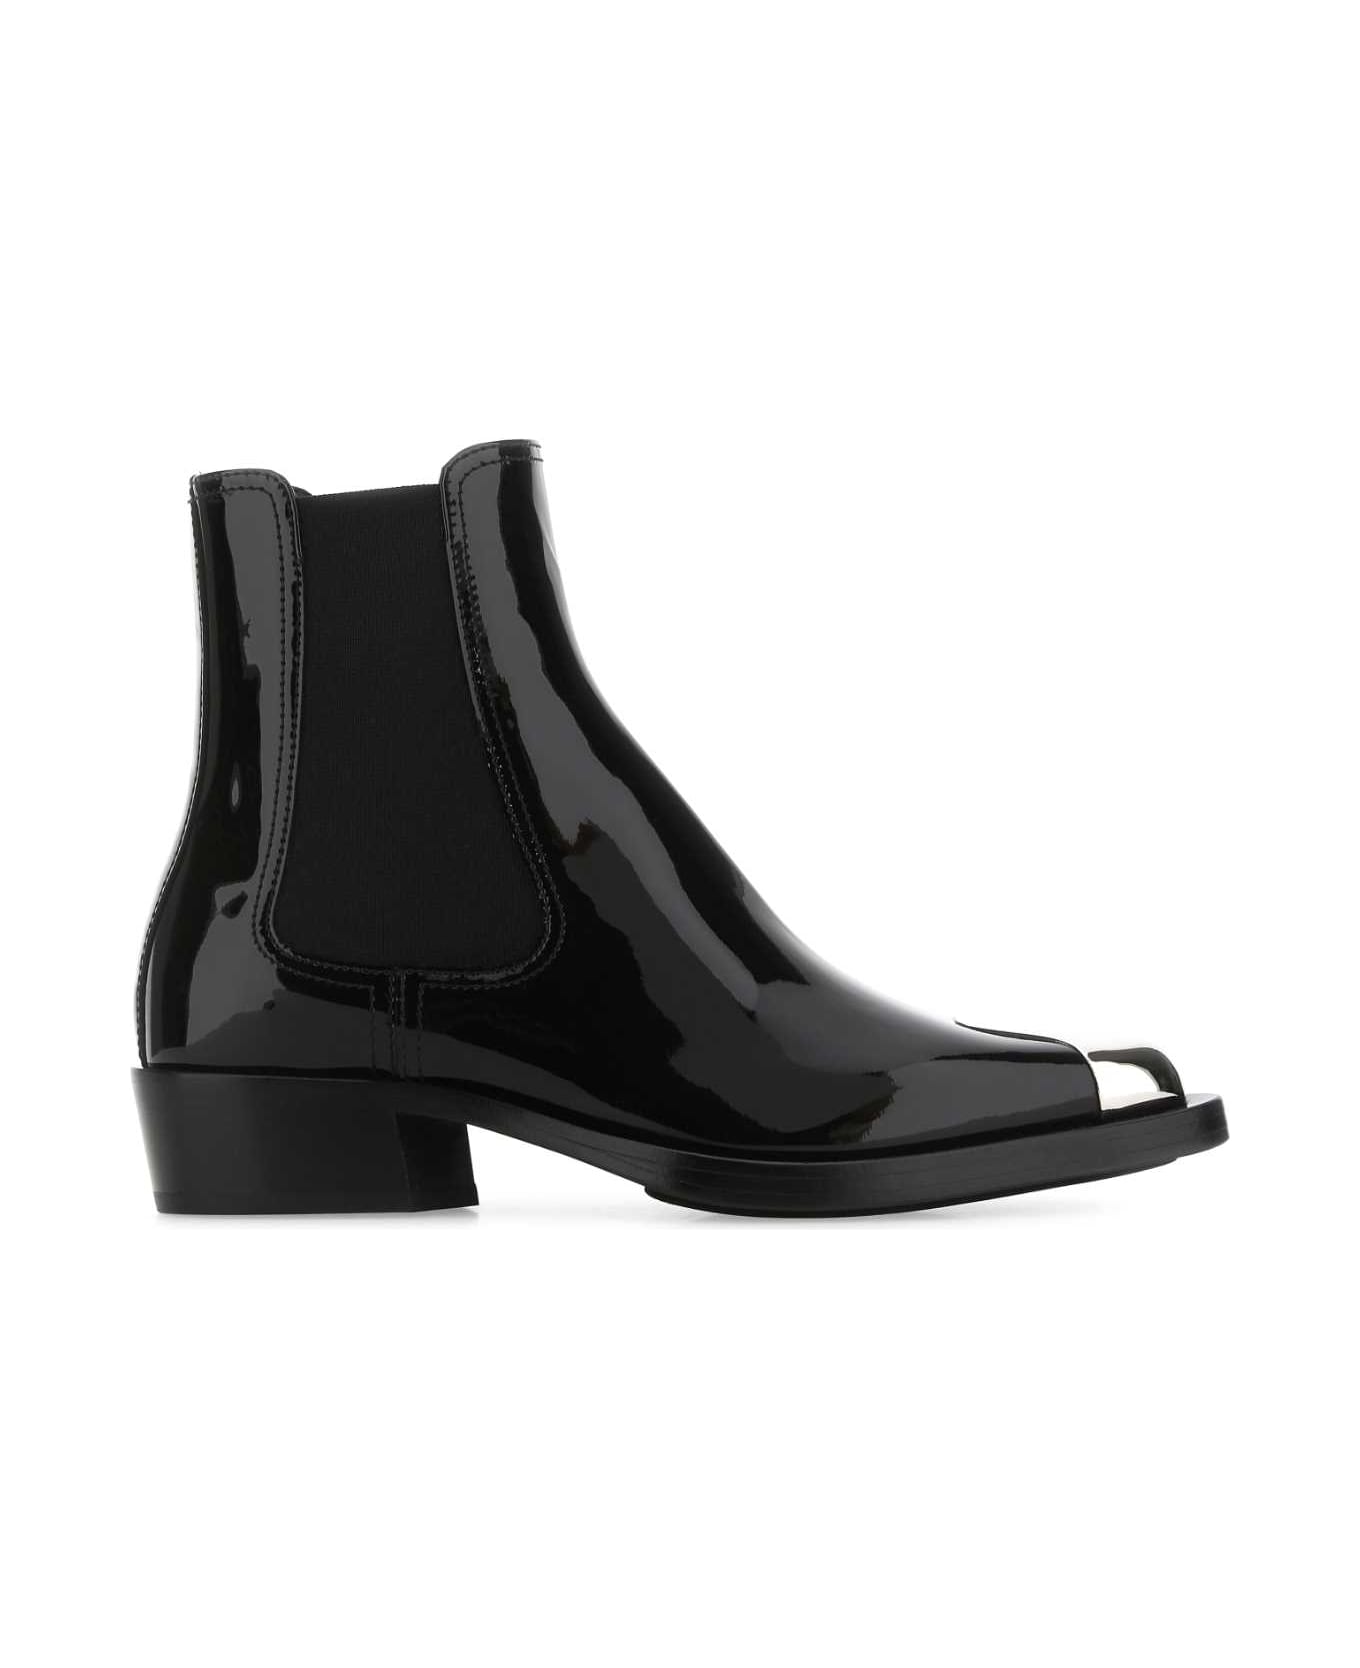 Alexander McQueen Black Leather Ankle Boots - 1081